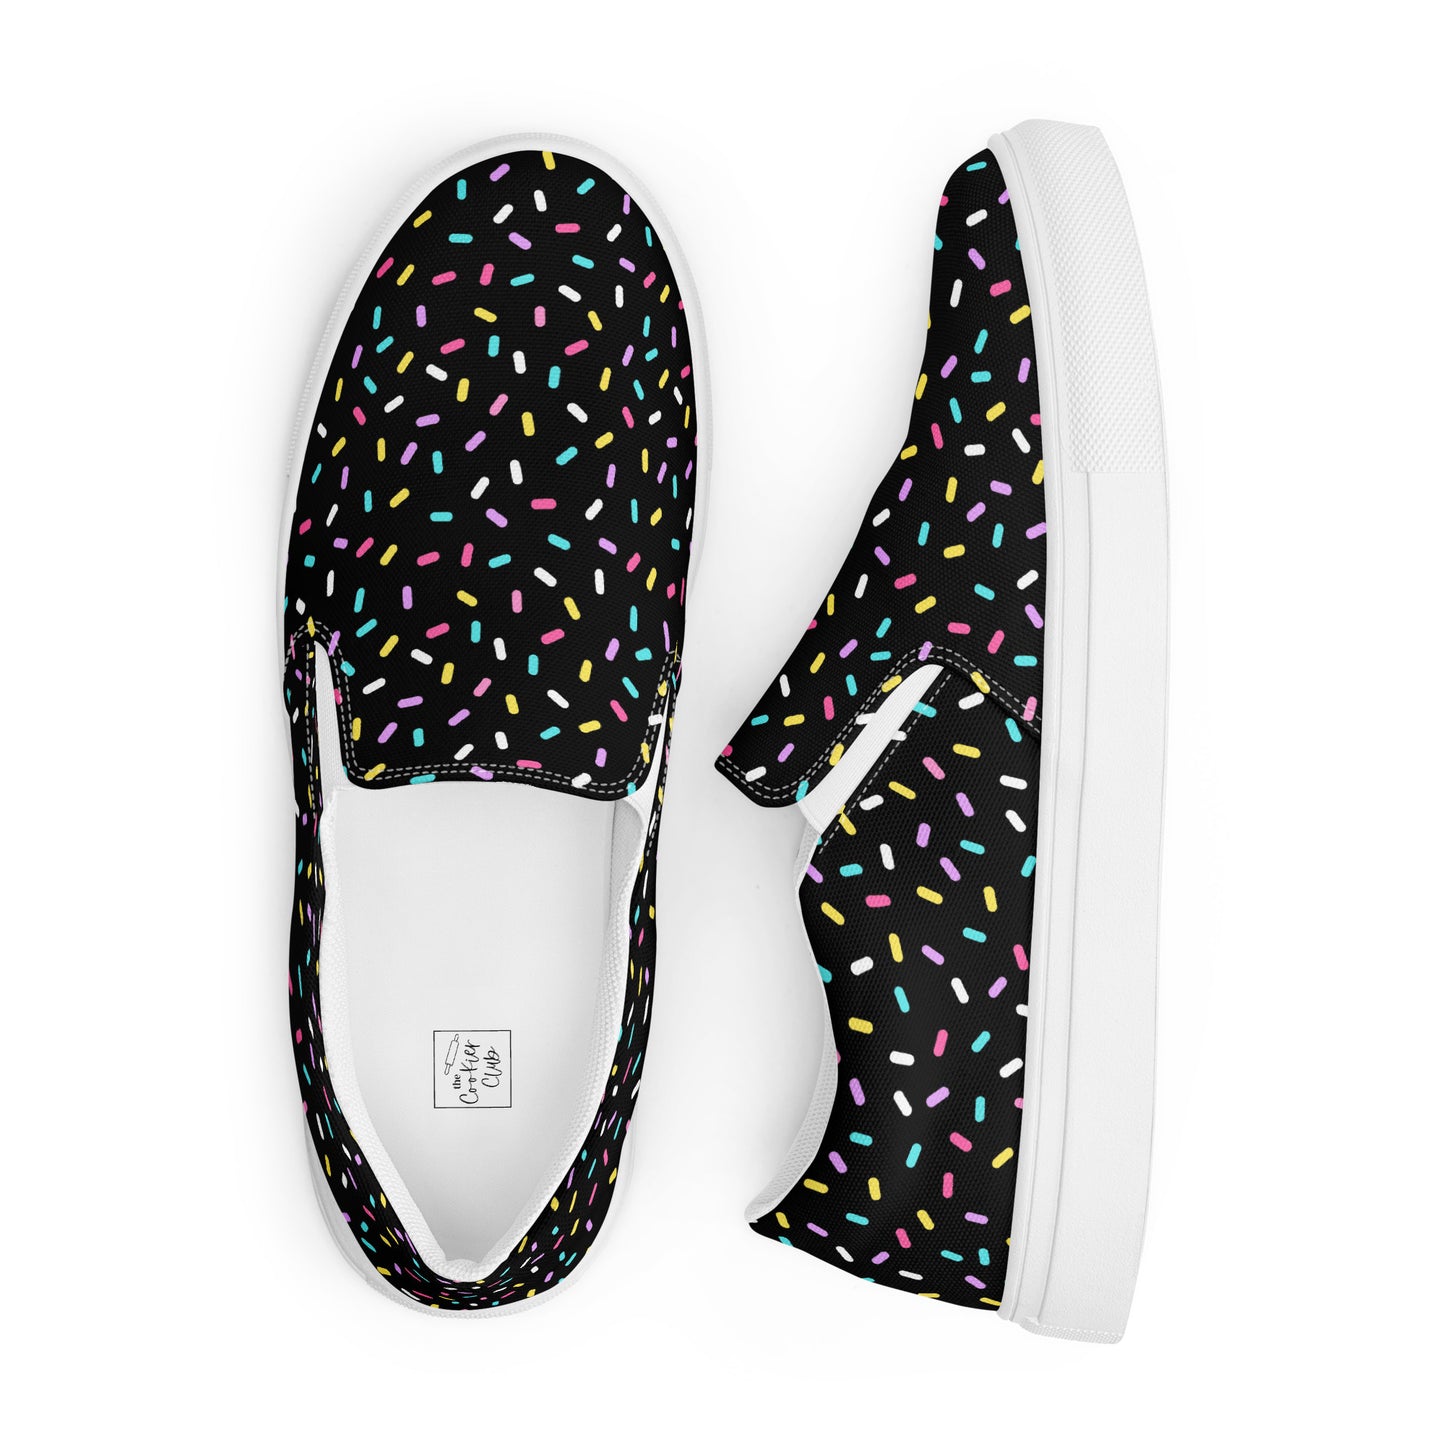 Sprinkled with Love - Women’s Slip-on Canvas Shoes in Black